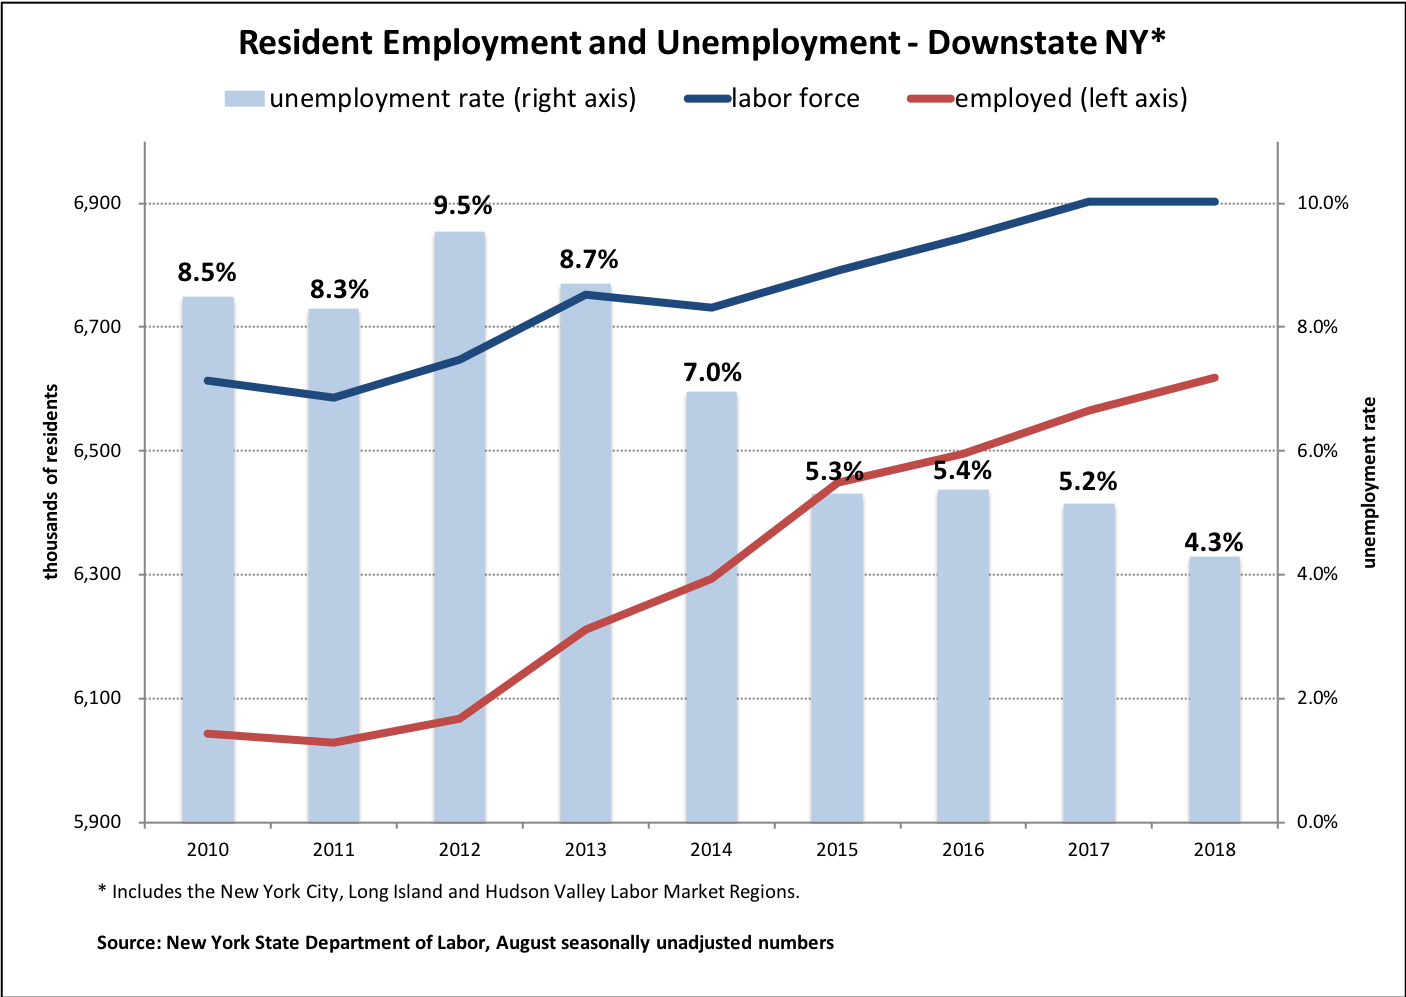 Unemployment rates in New York, 2010